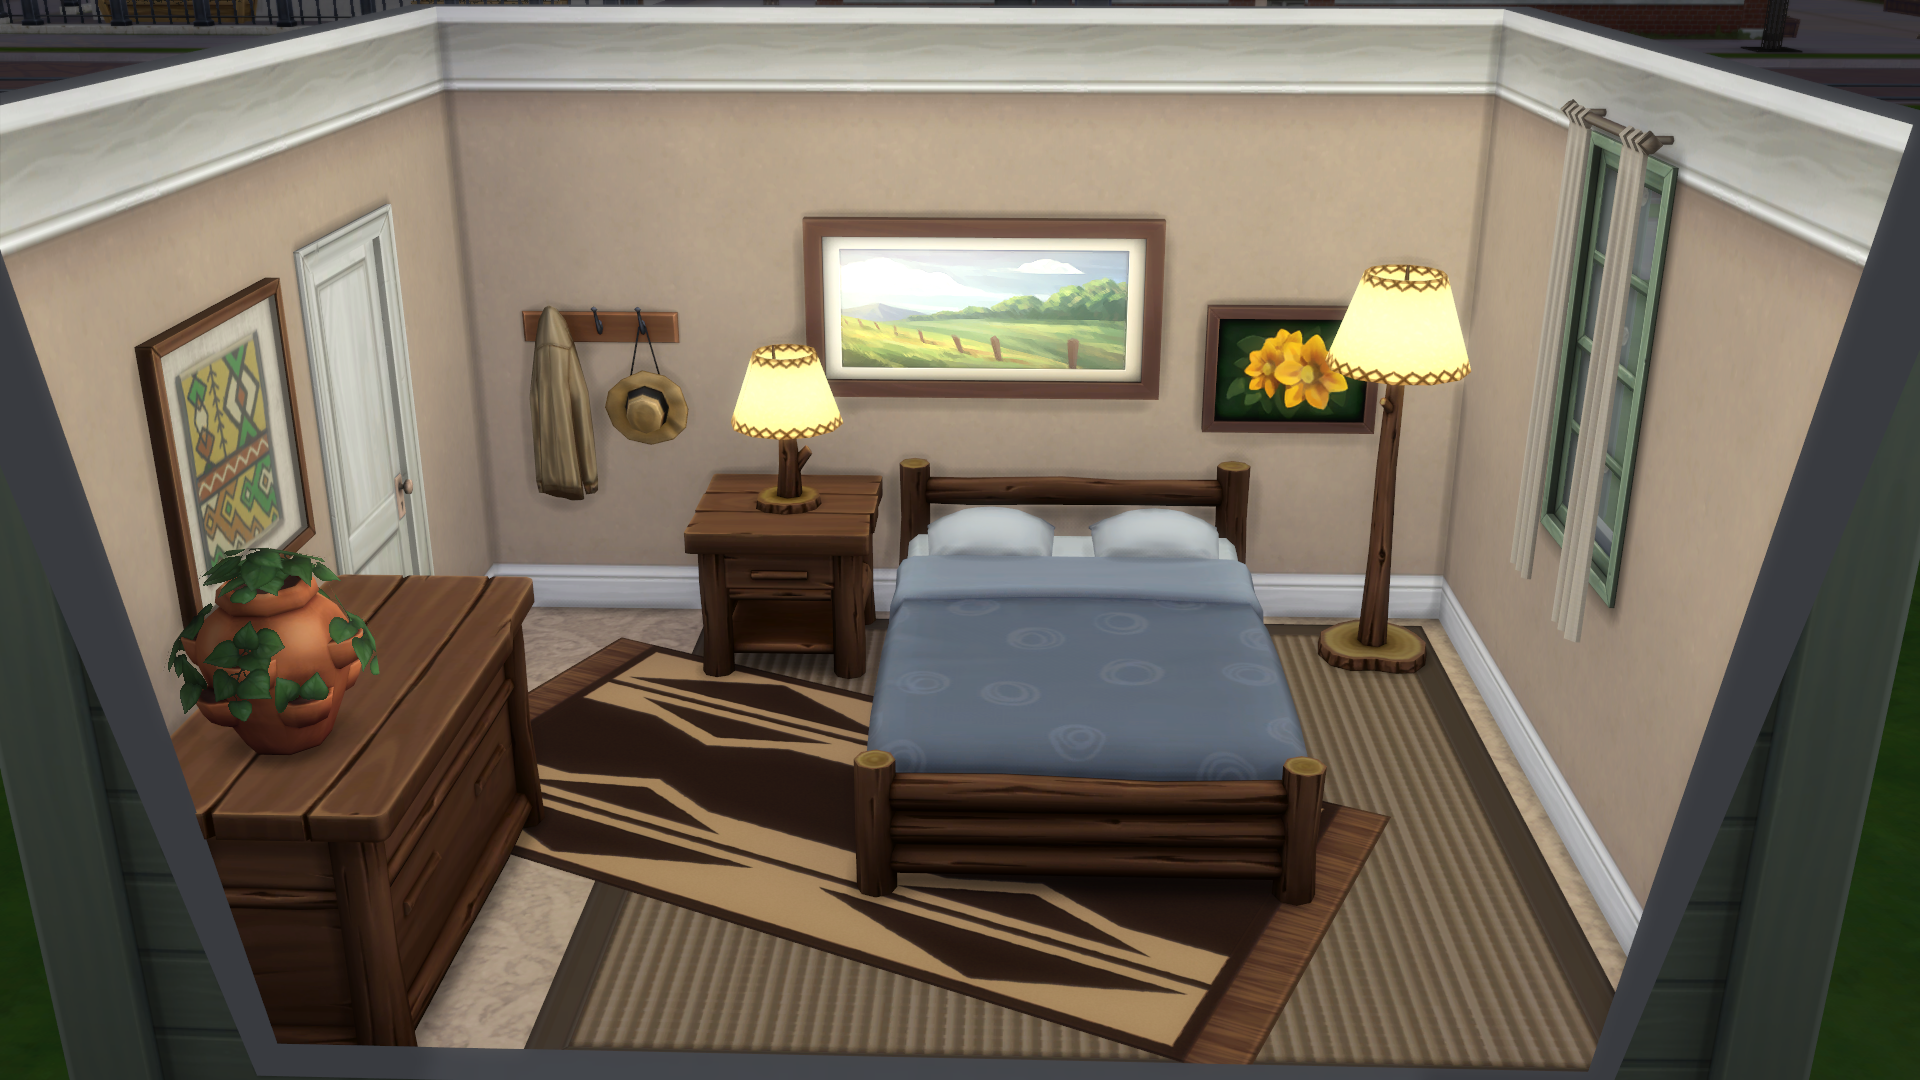 The Sims 4 Upgrading Your Starter Home Bedroom Basics